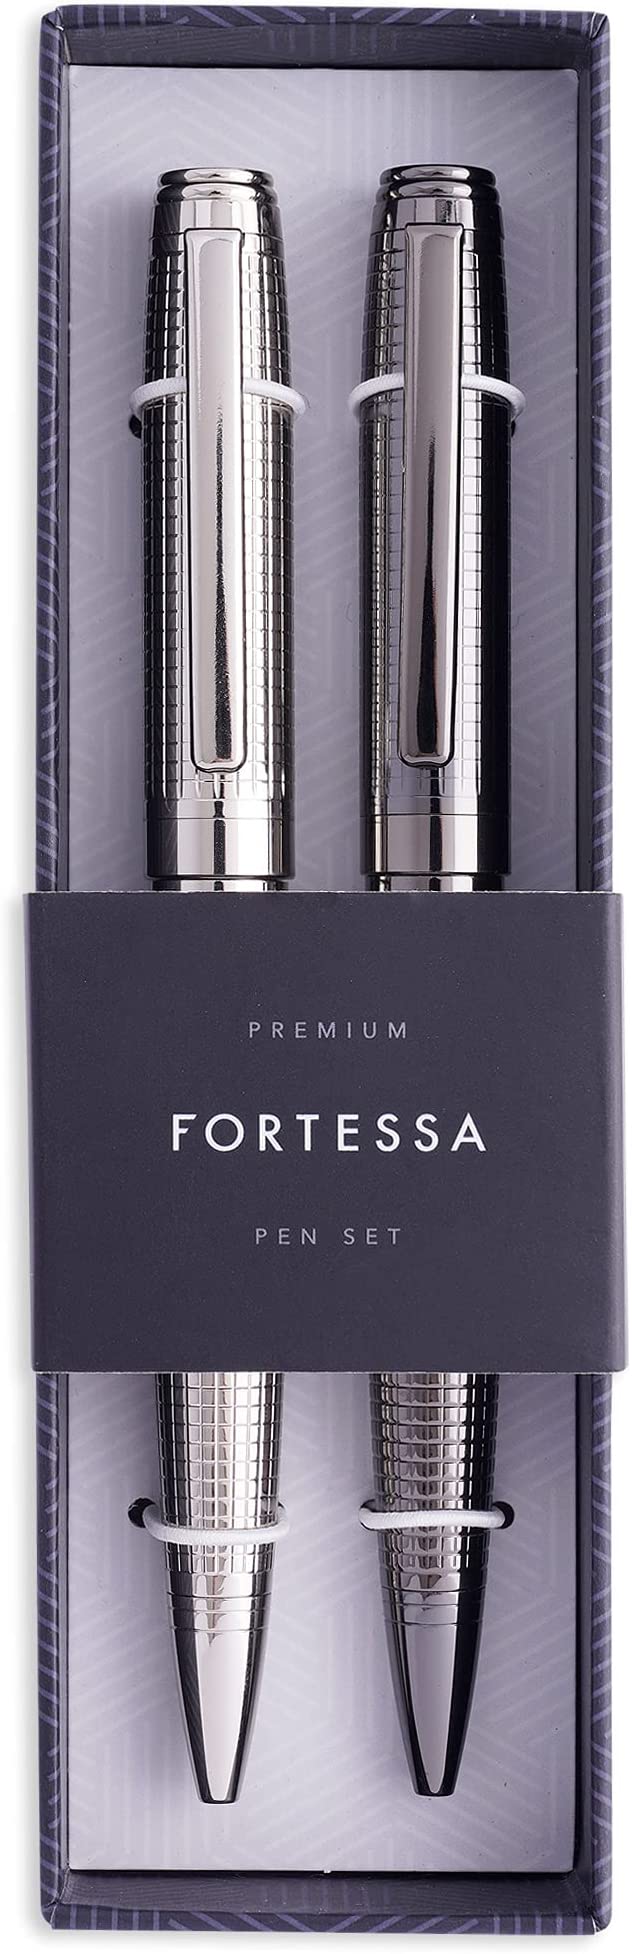 Fancy Pen Gift Set - Silver and Gunmetal Grey - Luxury Refillable Nice Pen Set with Black Ink, by Fortessa